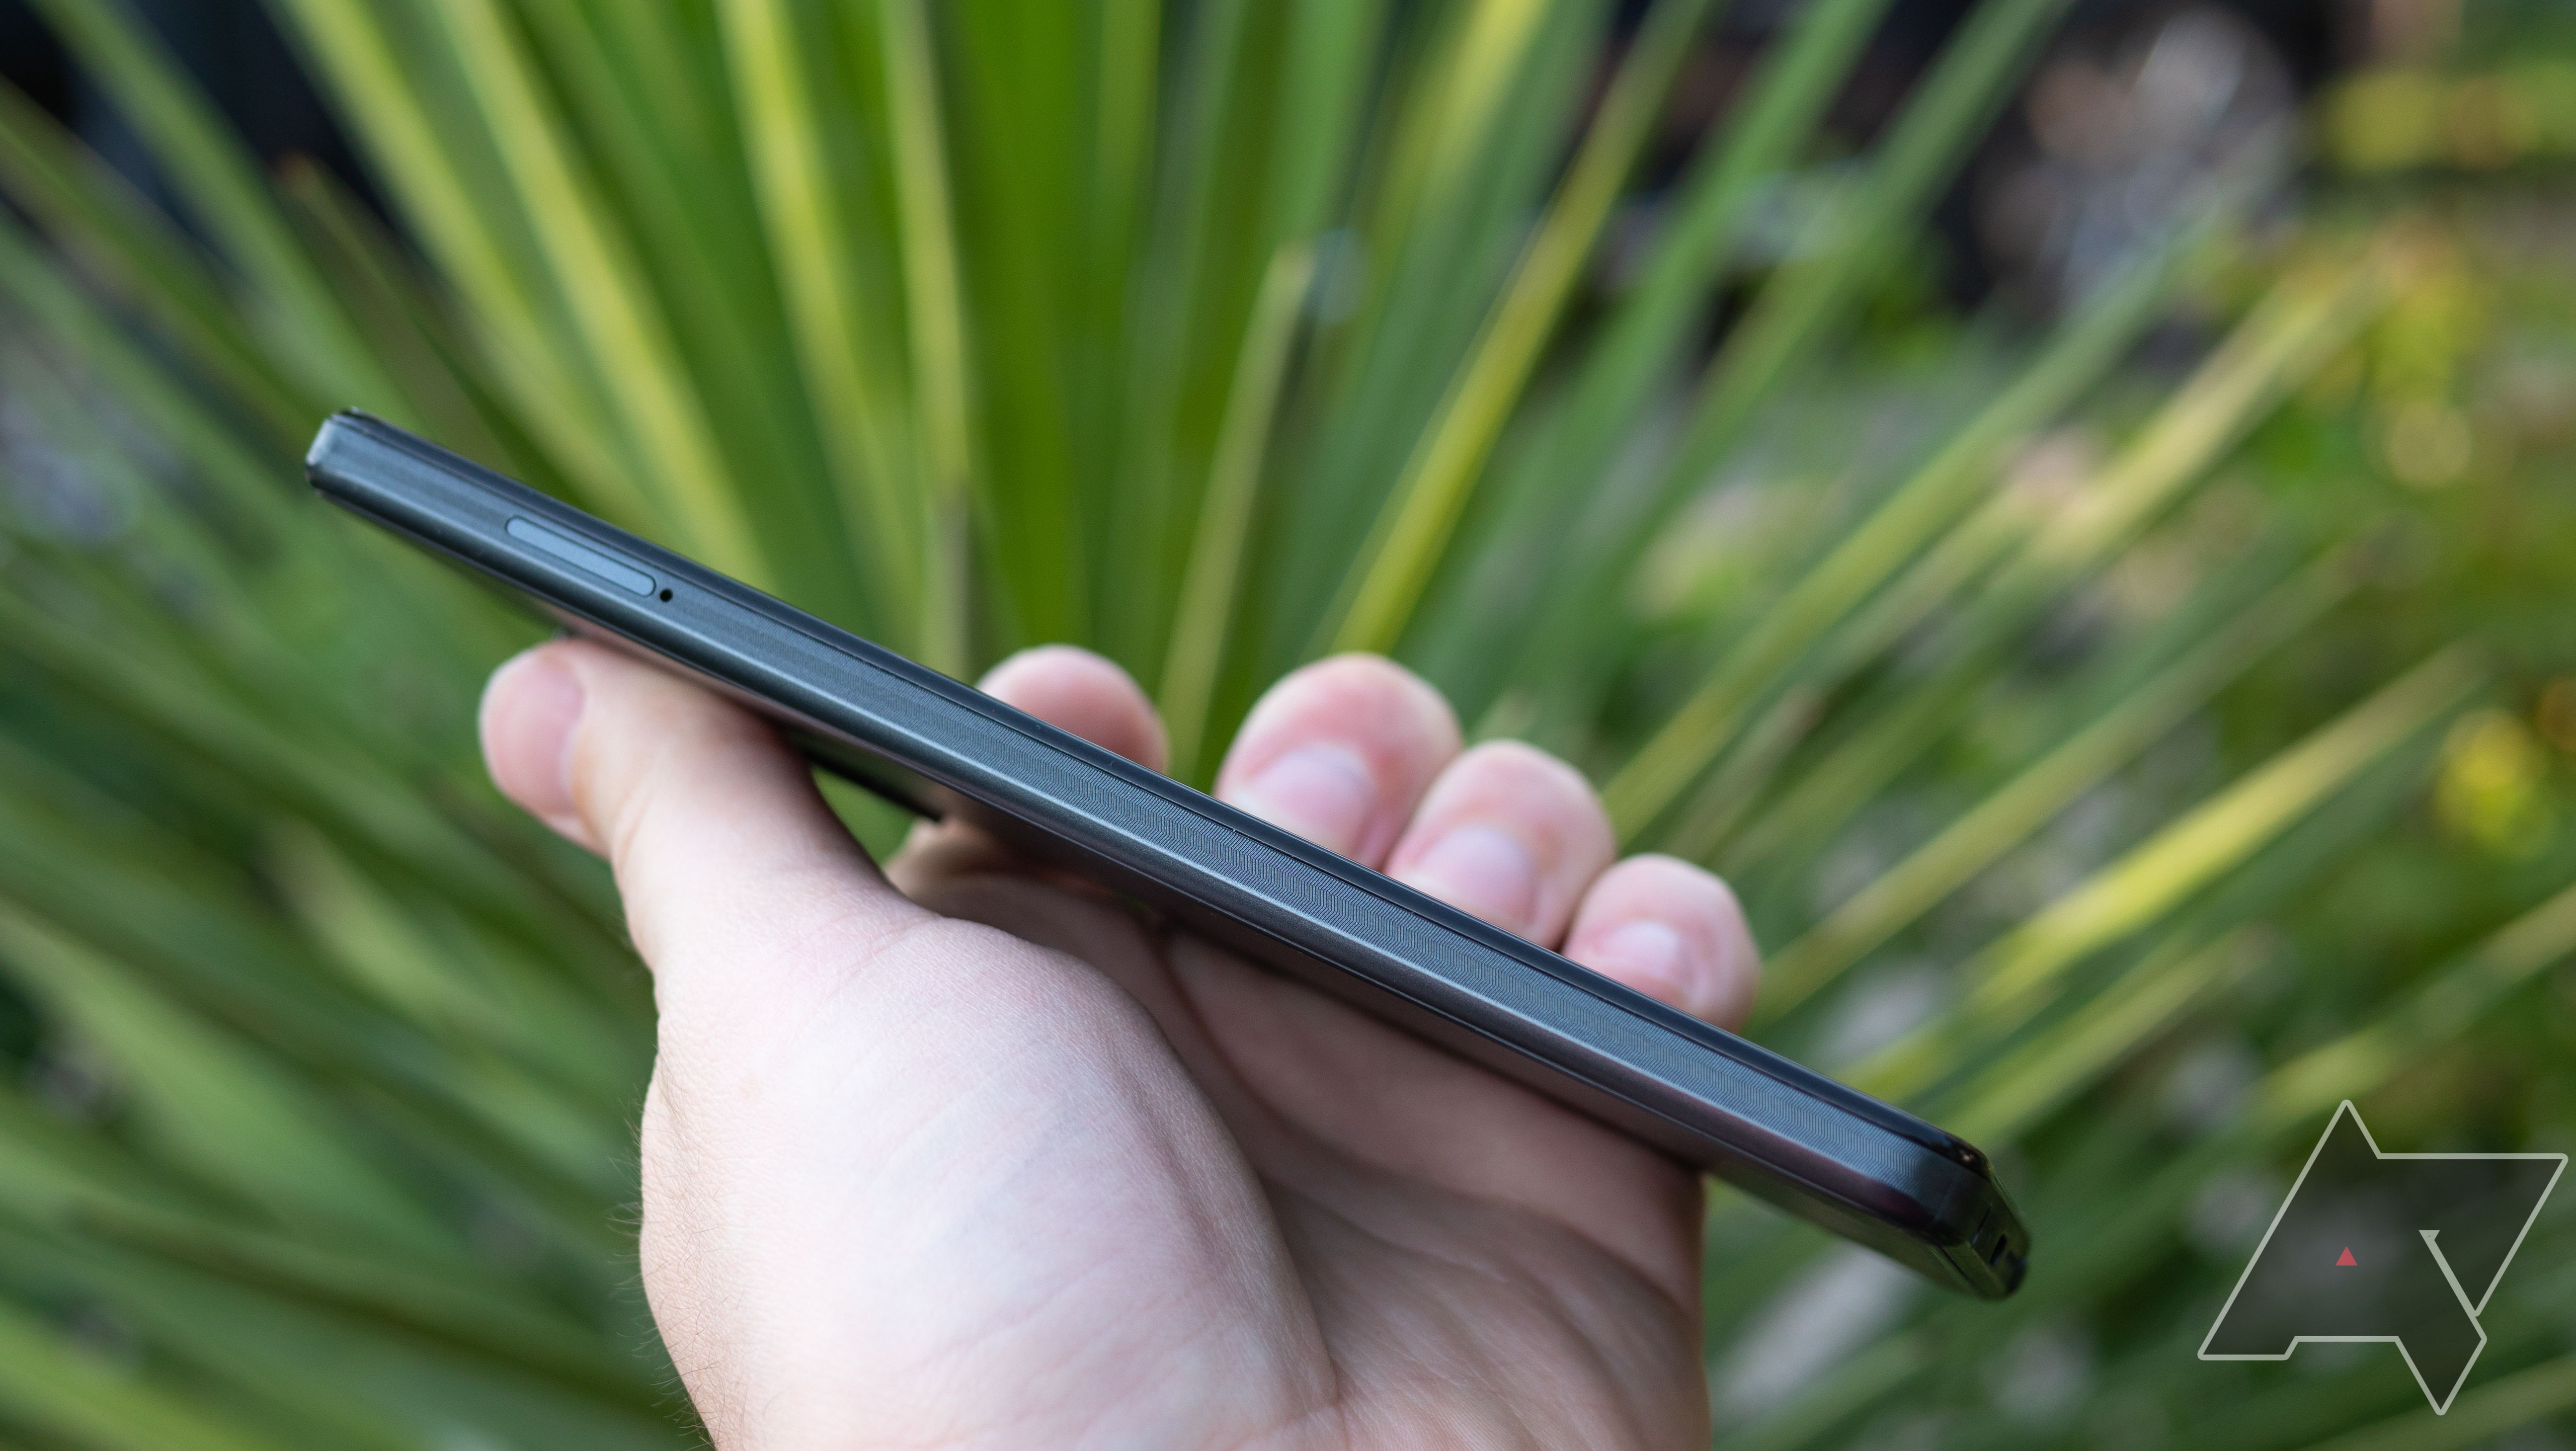 TCL Stylus 5G Review: How 4 Months Went With This $258 Phone - CNET